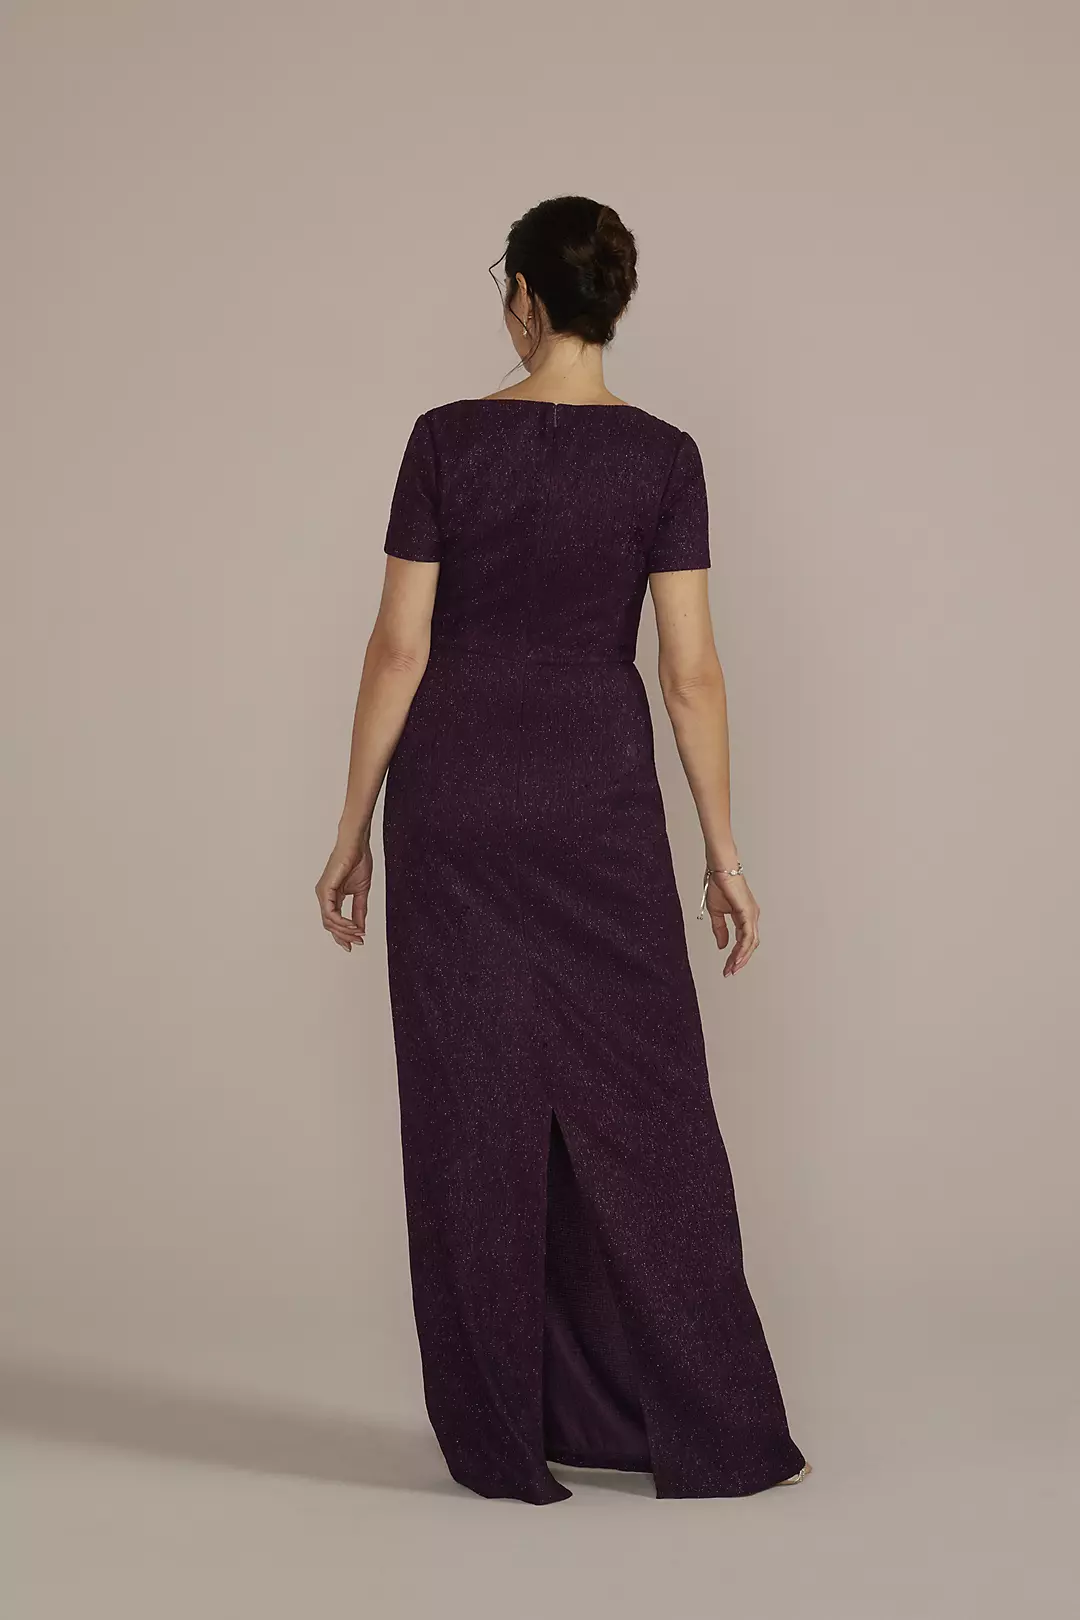 Cap Sleeve Glitter Knit Gown with Slit Image 2